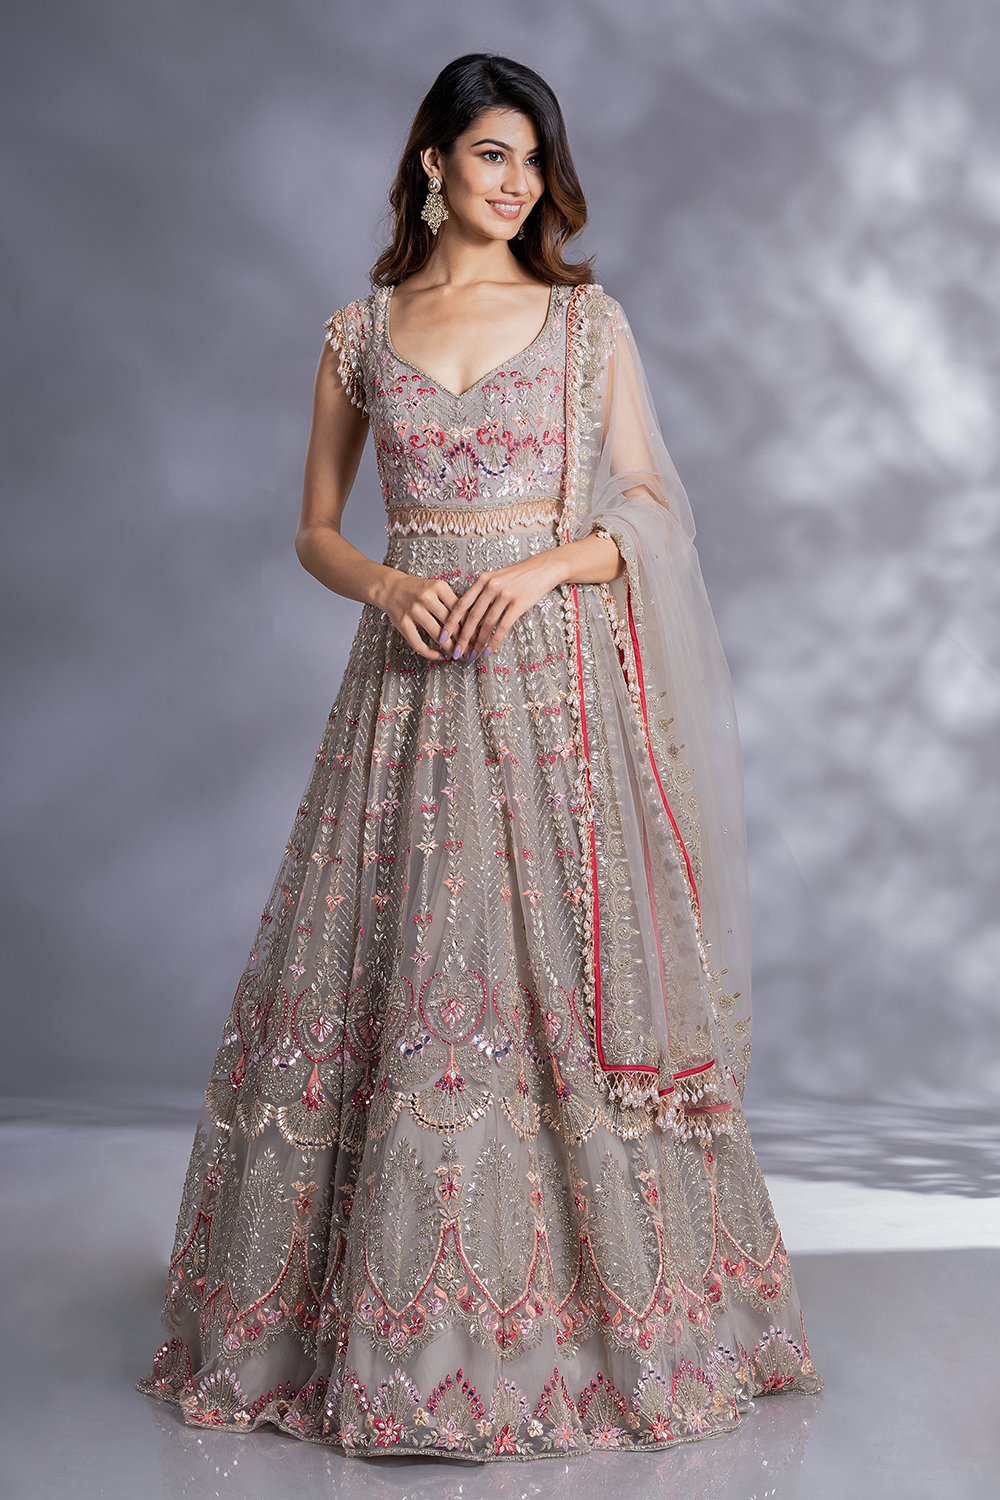 ASH GREY CLASSIC TULLE GOWN WITH A HAND EMBROIDERED BODICE AND SILVER  DETAILS PAIRED WITH A MATCHING FRILL DUPATTA. - Seasons India